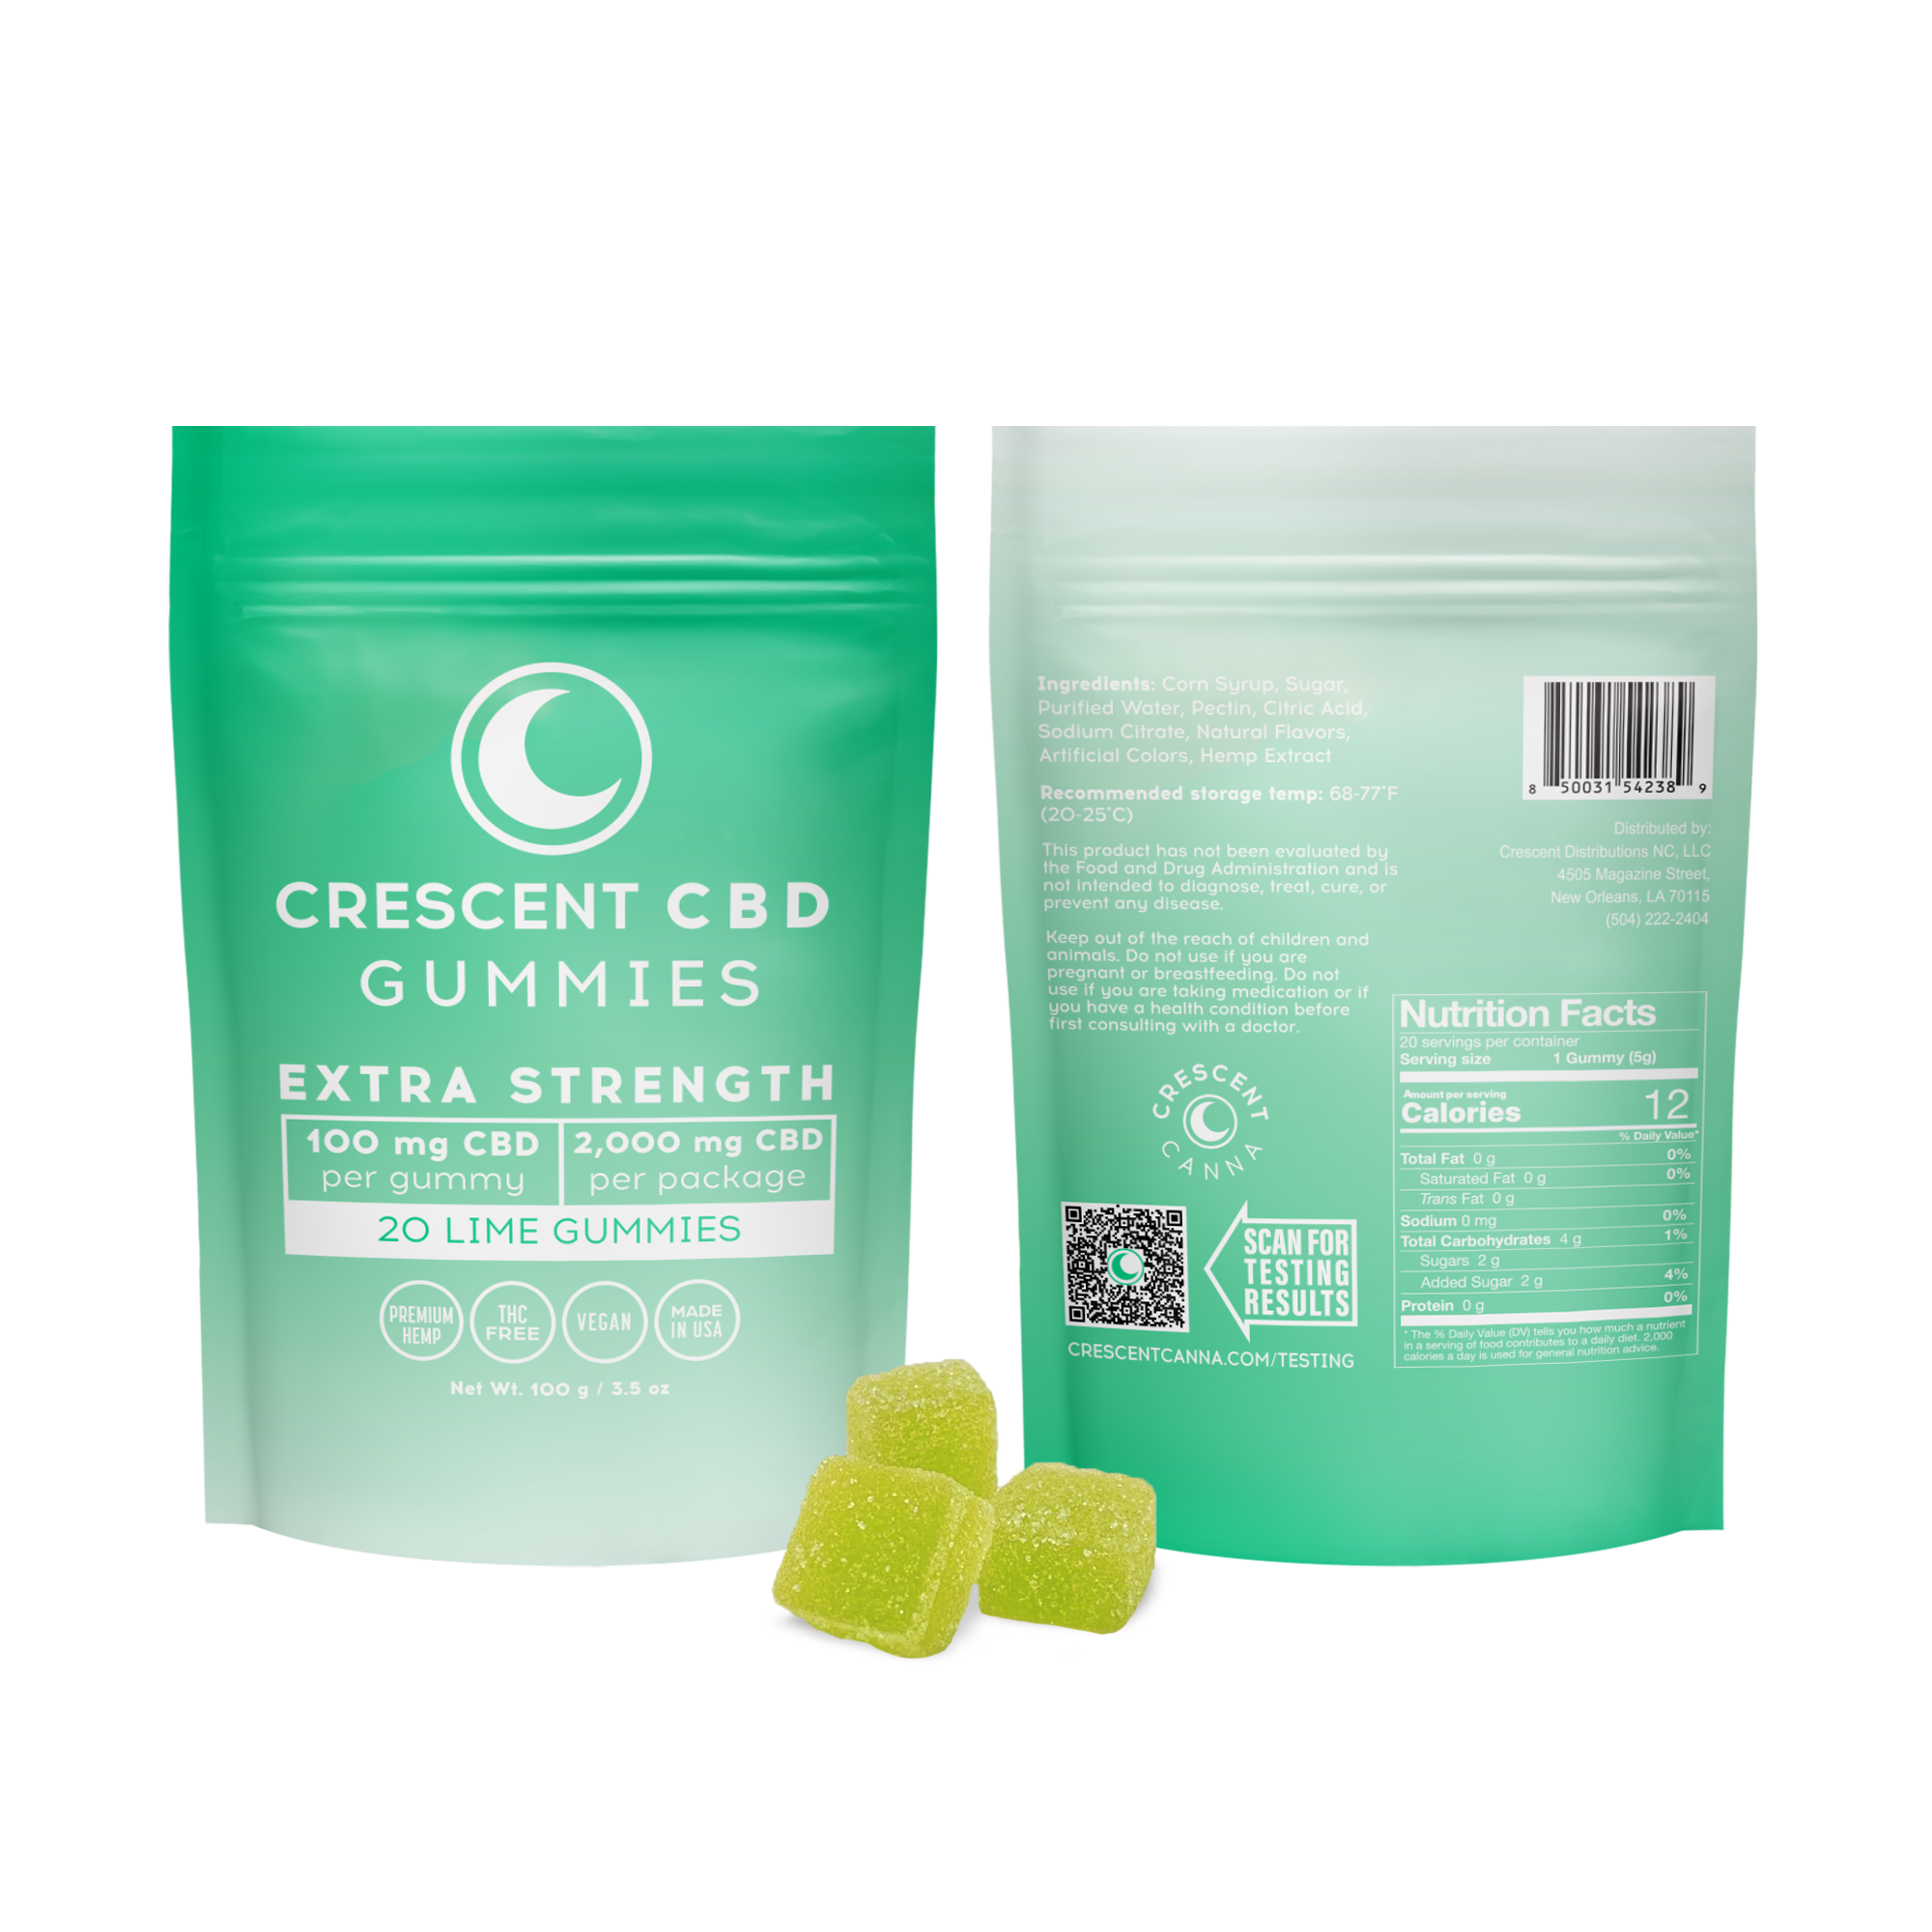 Extra-strength CBD gummies back and front